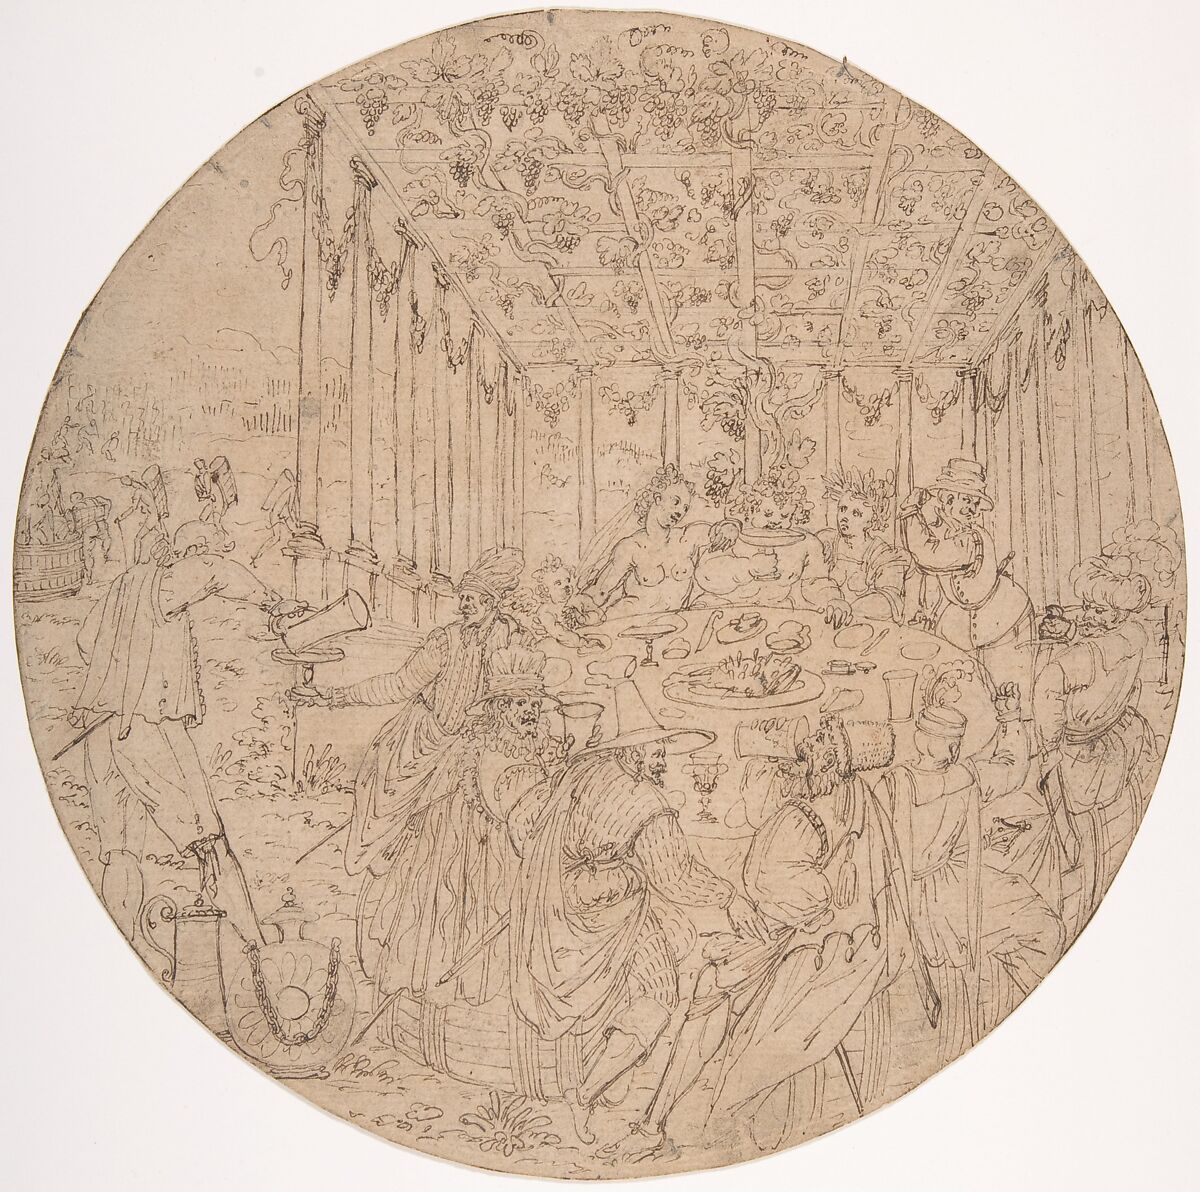 Banquet in an Arbor, Anonymous, Netherlandish, 16th century, Pen and brown ink, graphite. Incised. Verso rubbed in red chalk 